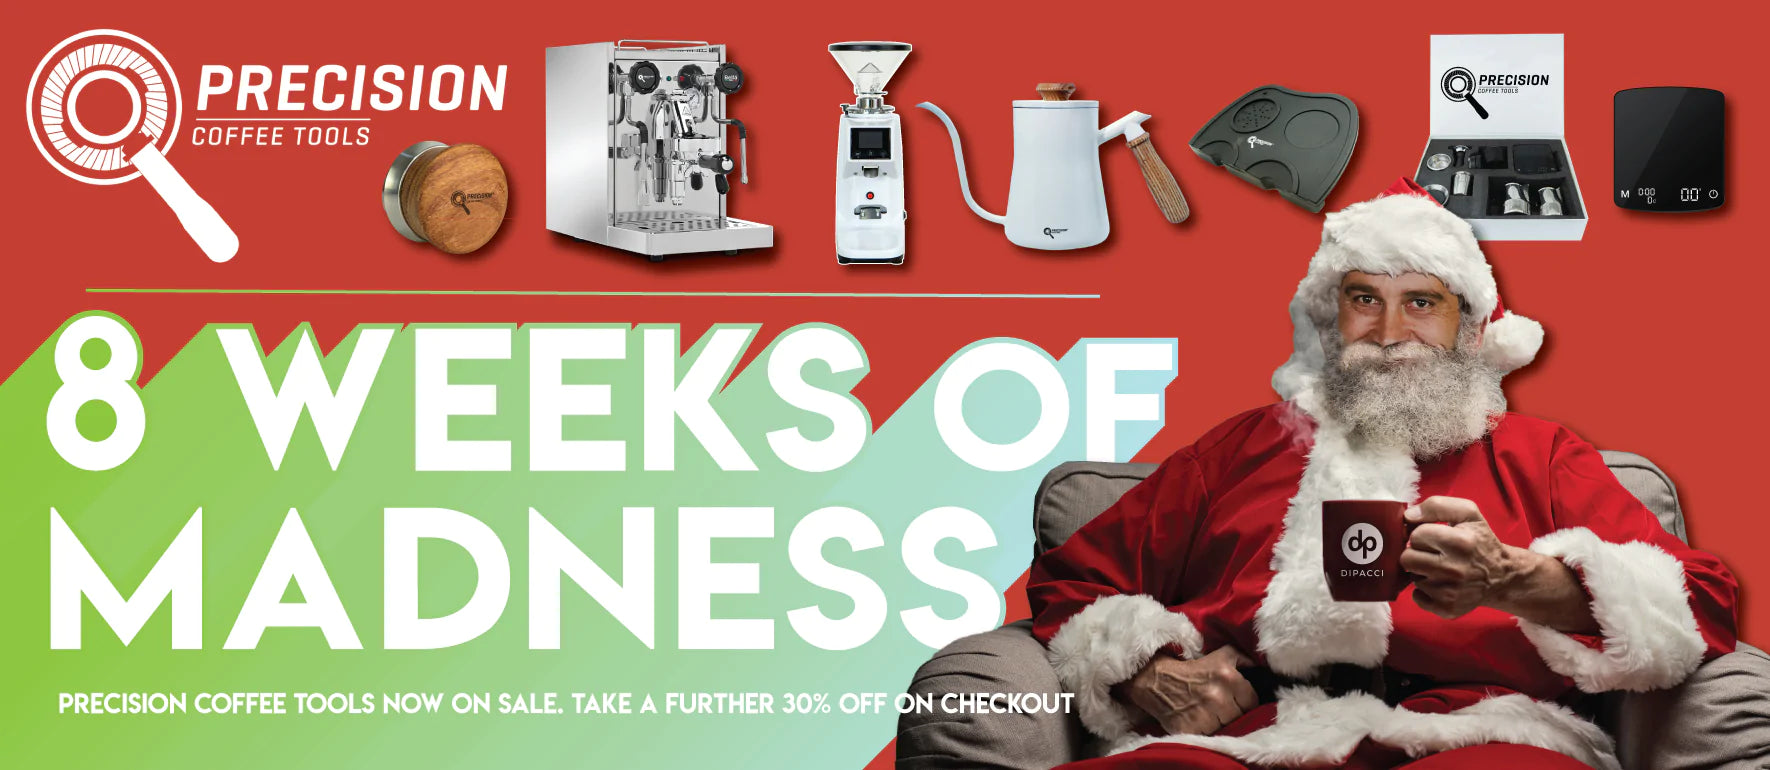 Best Coffee Offers For Christmas